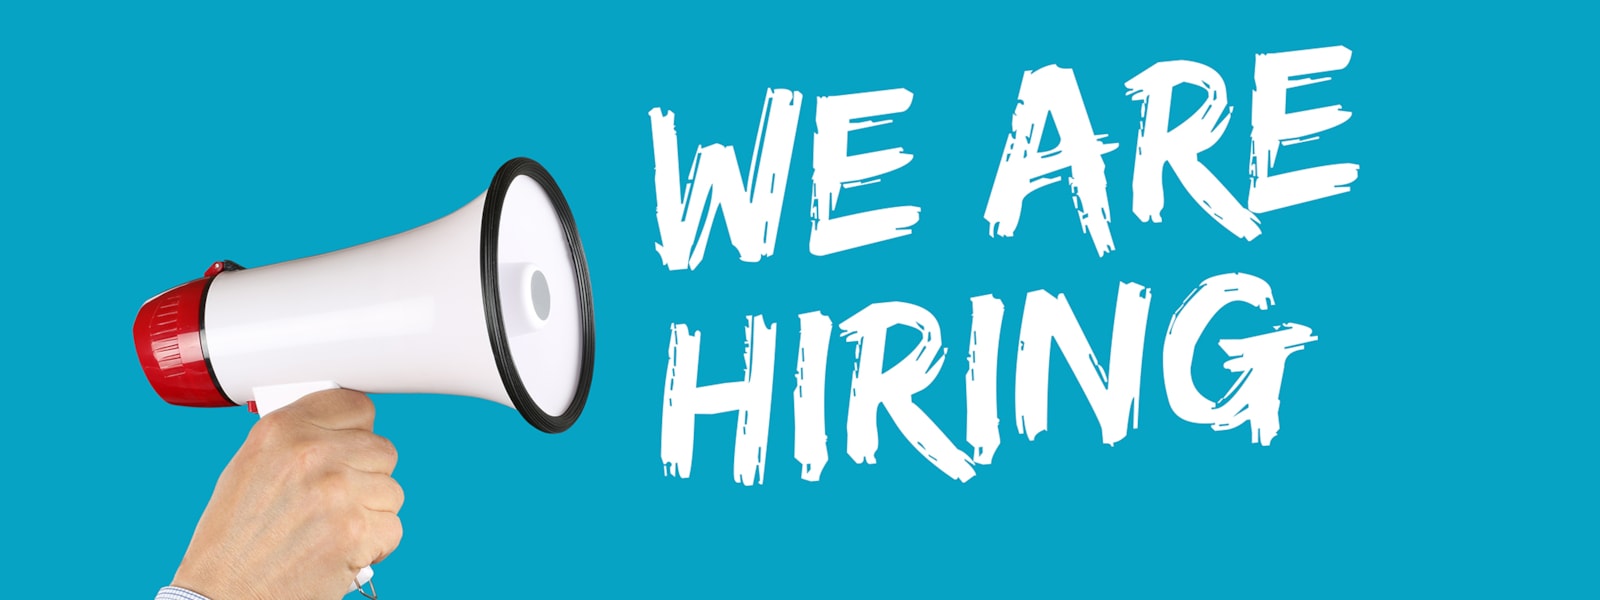 We are hiring with megaphone